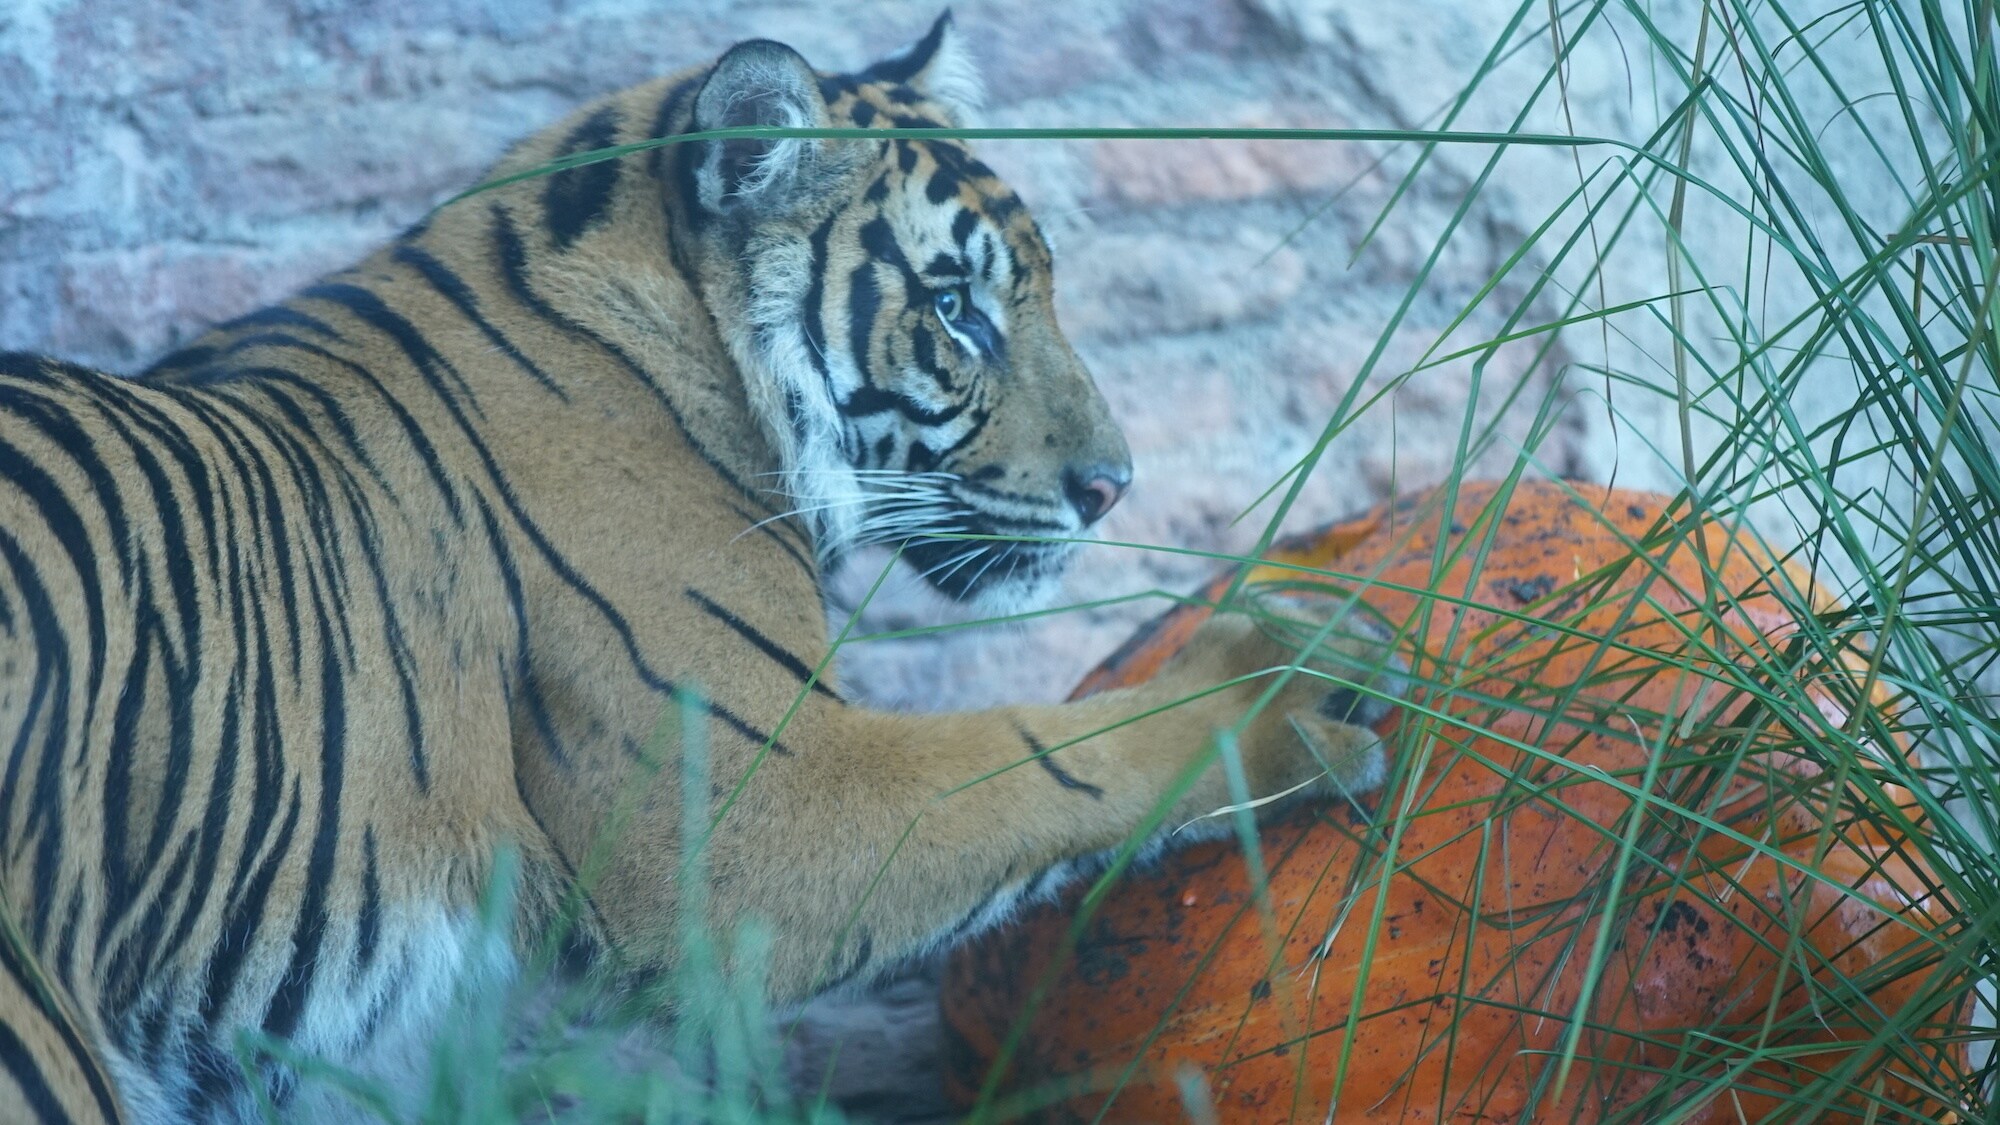 Anala the Sumatran tiger investigates a pumpkin filled with meatballs placed in the enclosure by keepers as enrichment. (Disney)